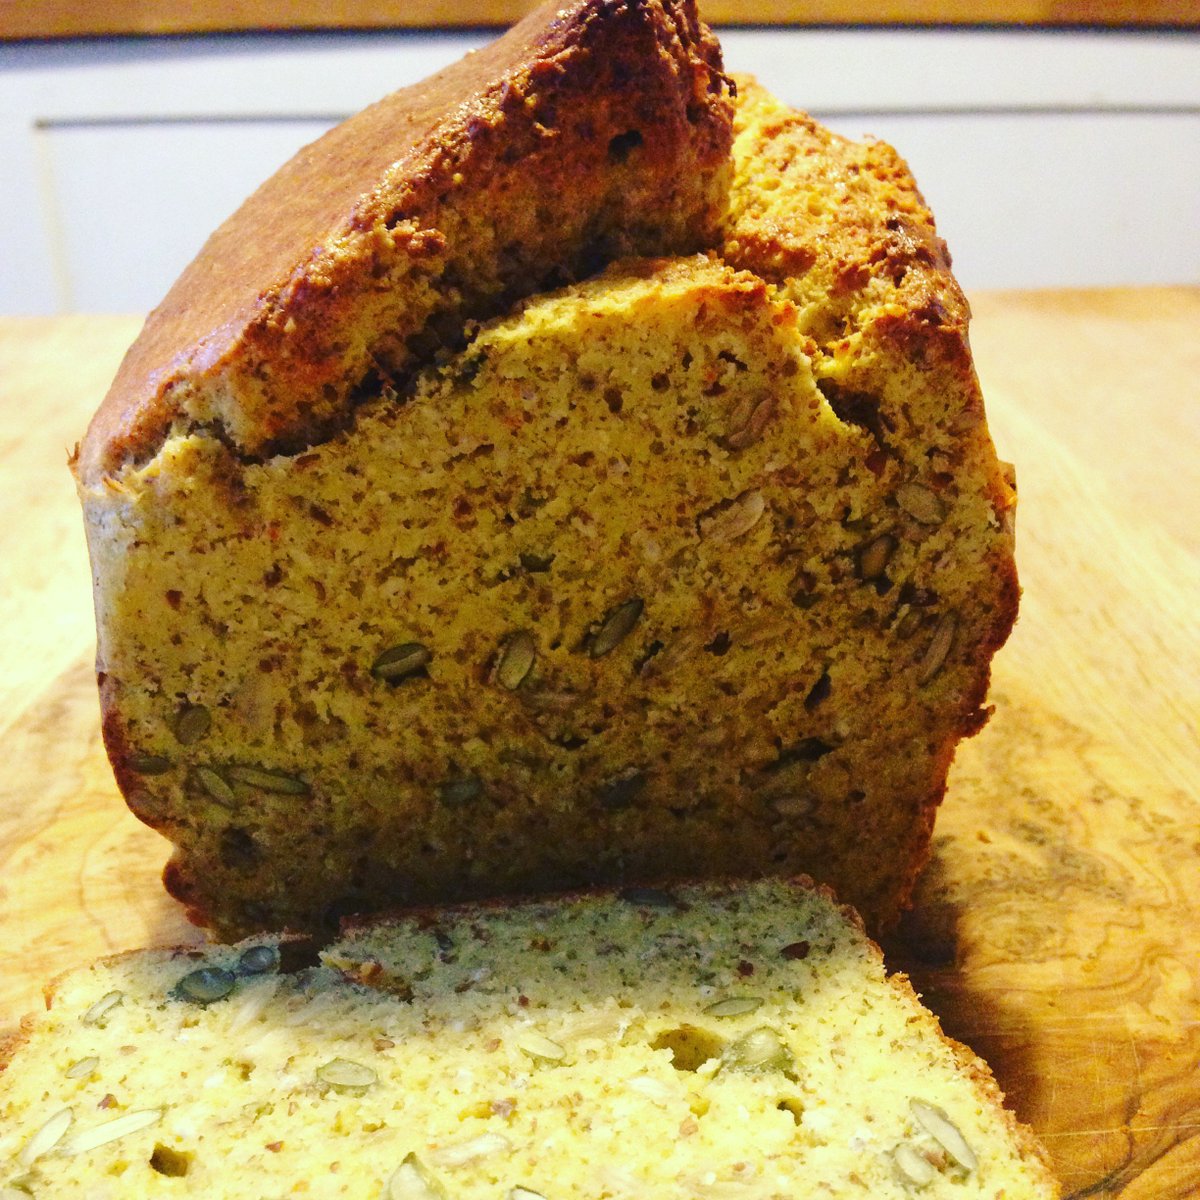 RT @GetKarmly: Yum! I just tried @jamieoliver's #glutenfree #superfood #protein #loaf for the 1st time and it's delicious! ???? https://t.co/h…